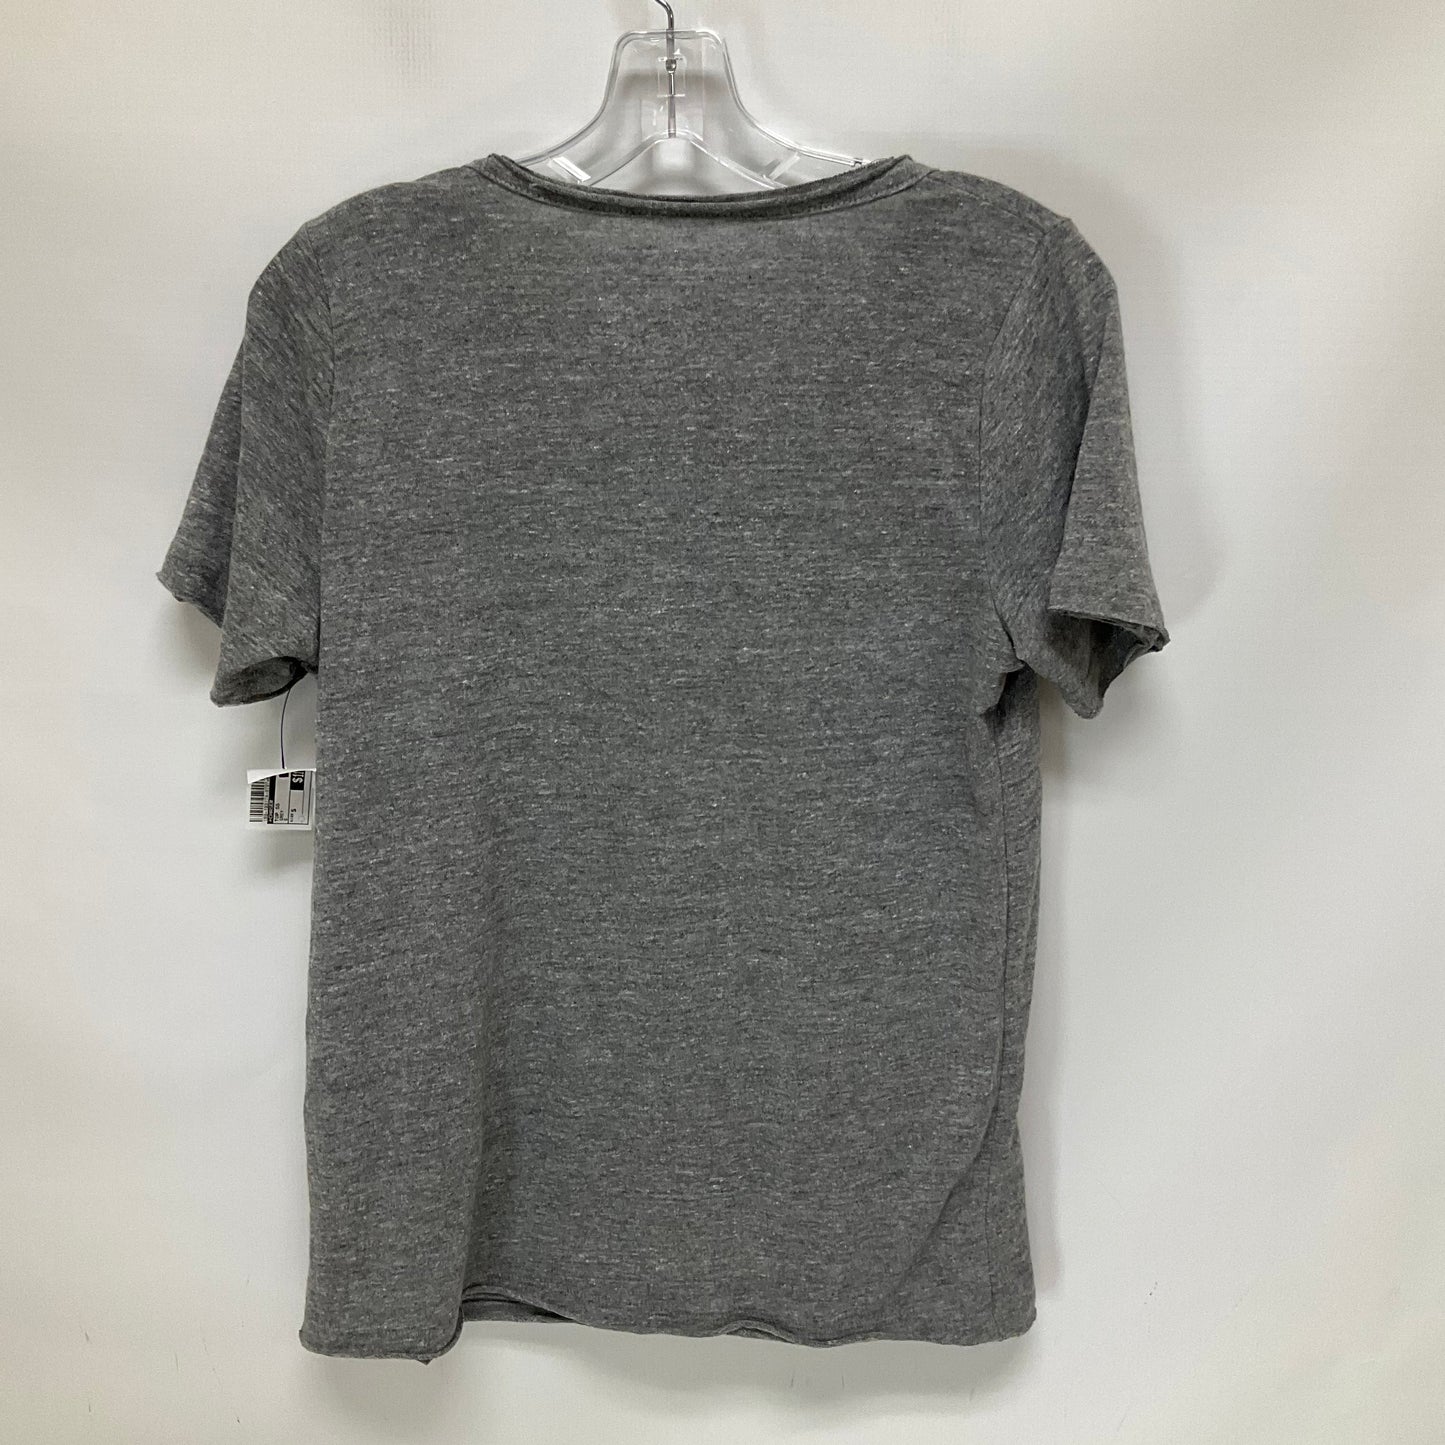 Grey Top Short Sleeve Chaser, Size S